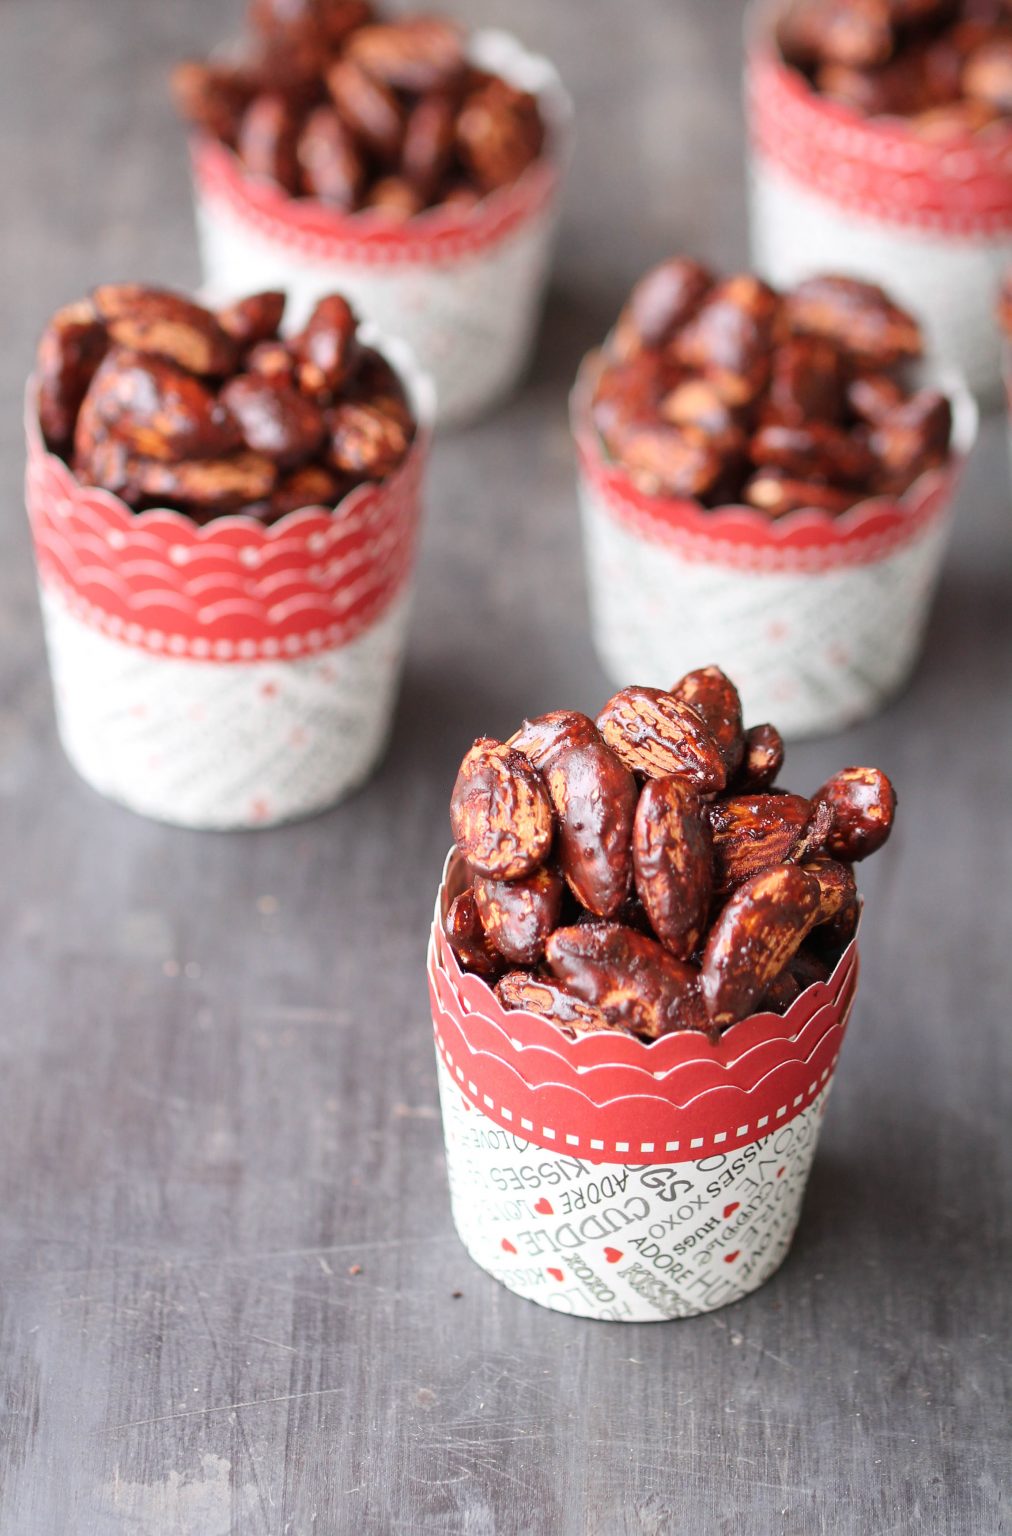 roasted almonds with cocoa